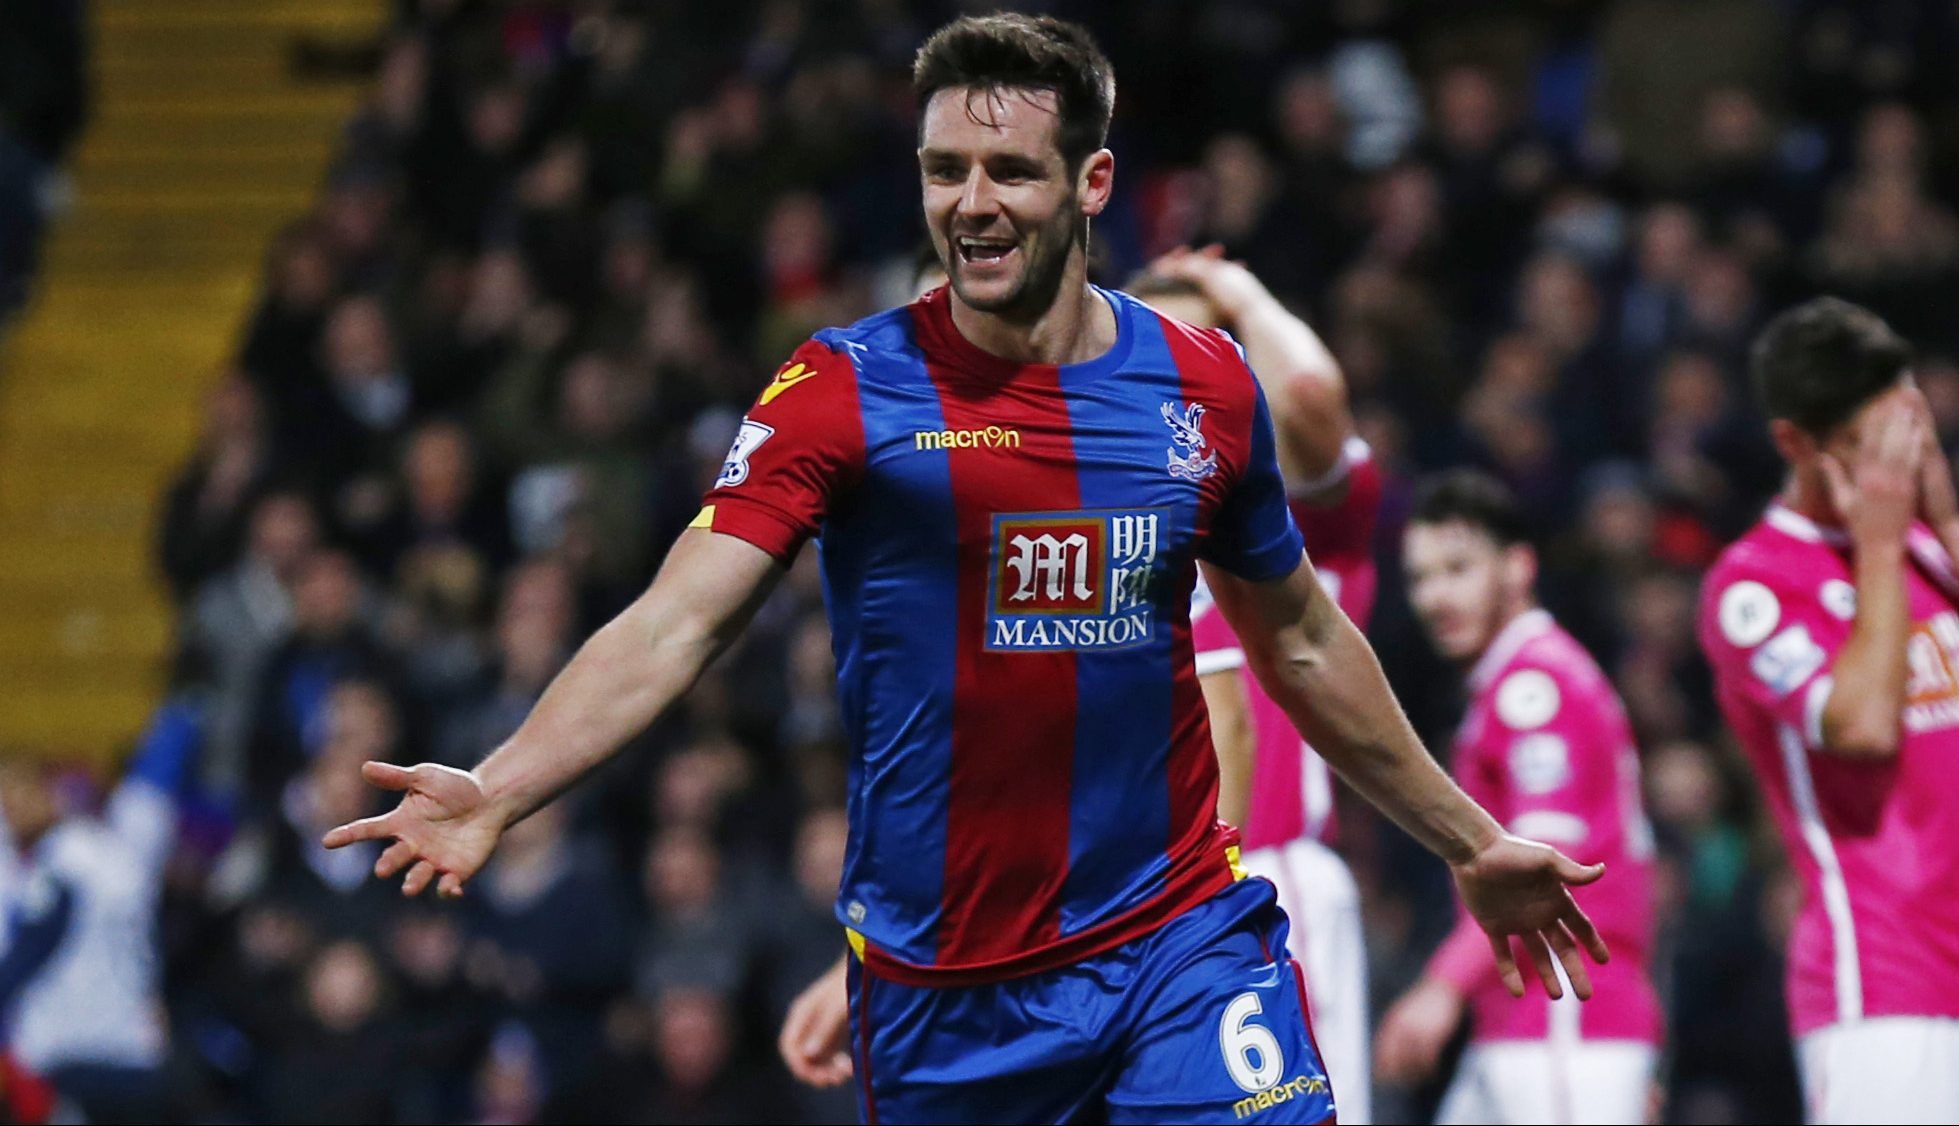 Football Soccer - Crystal Palace v AFC Bournemouth - Barclays Premier League - Selhurst Park - 2/2/16 
Scott Dann celebrates scoring the first goal for Crystal Palace 
Reuters / Eddie Keogh 
Livepic 
EDITORIAL USE ONLY. No use with unauthorized audio, video, data, fixture lists, club/league logos or 